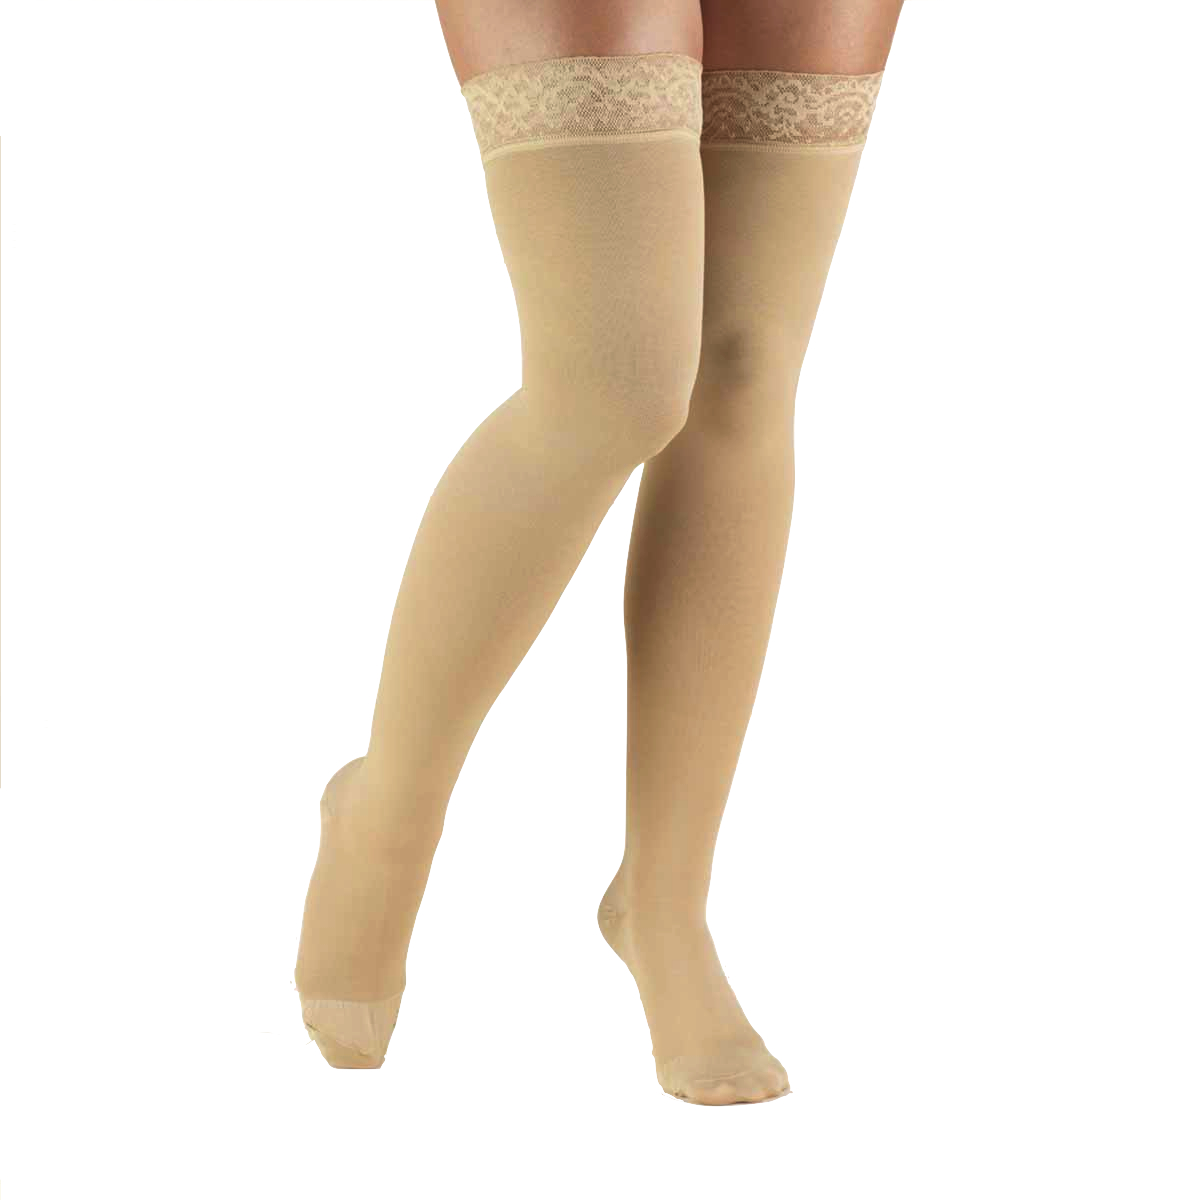 Truform 8867 (20-30 Thigh High, Lace Stay-up Top)